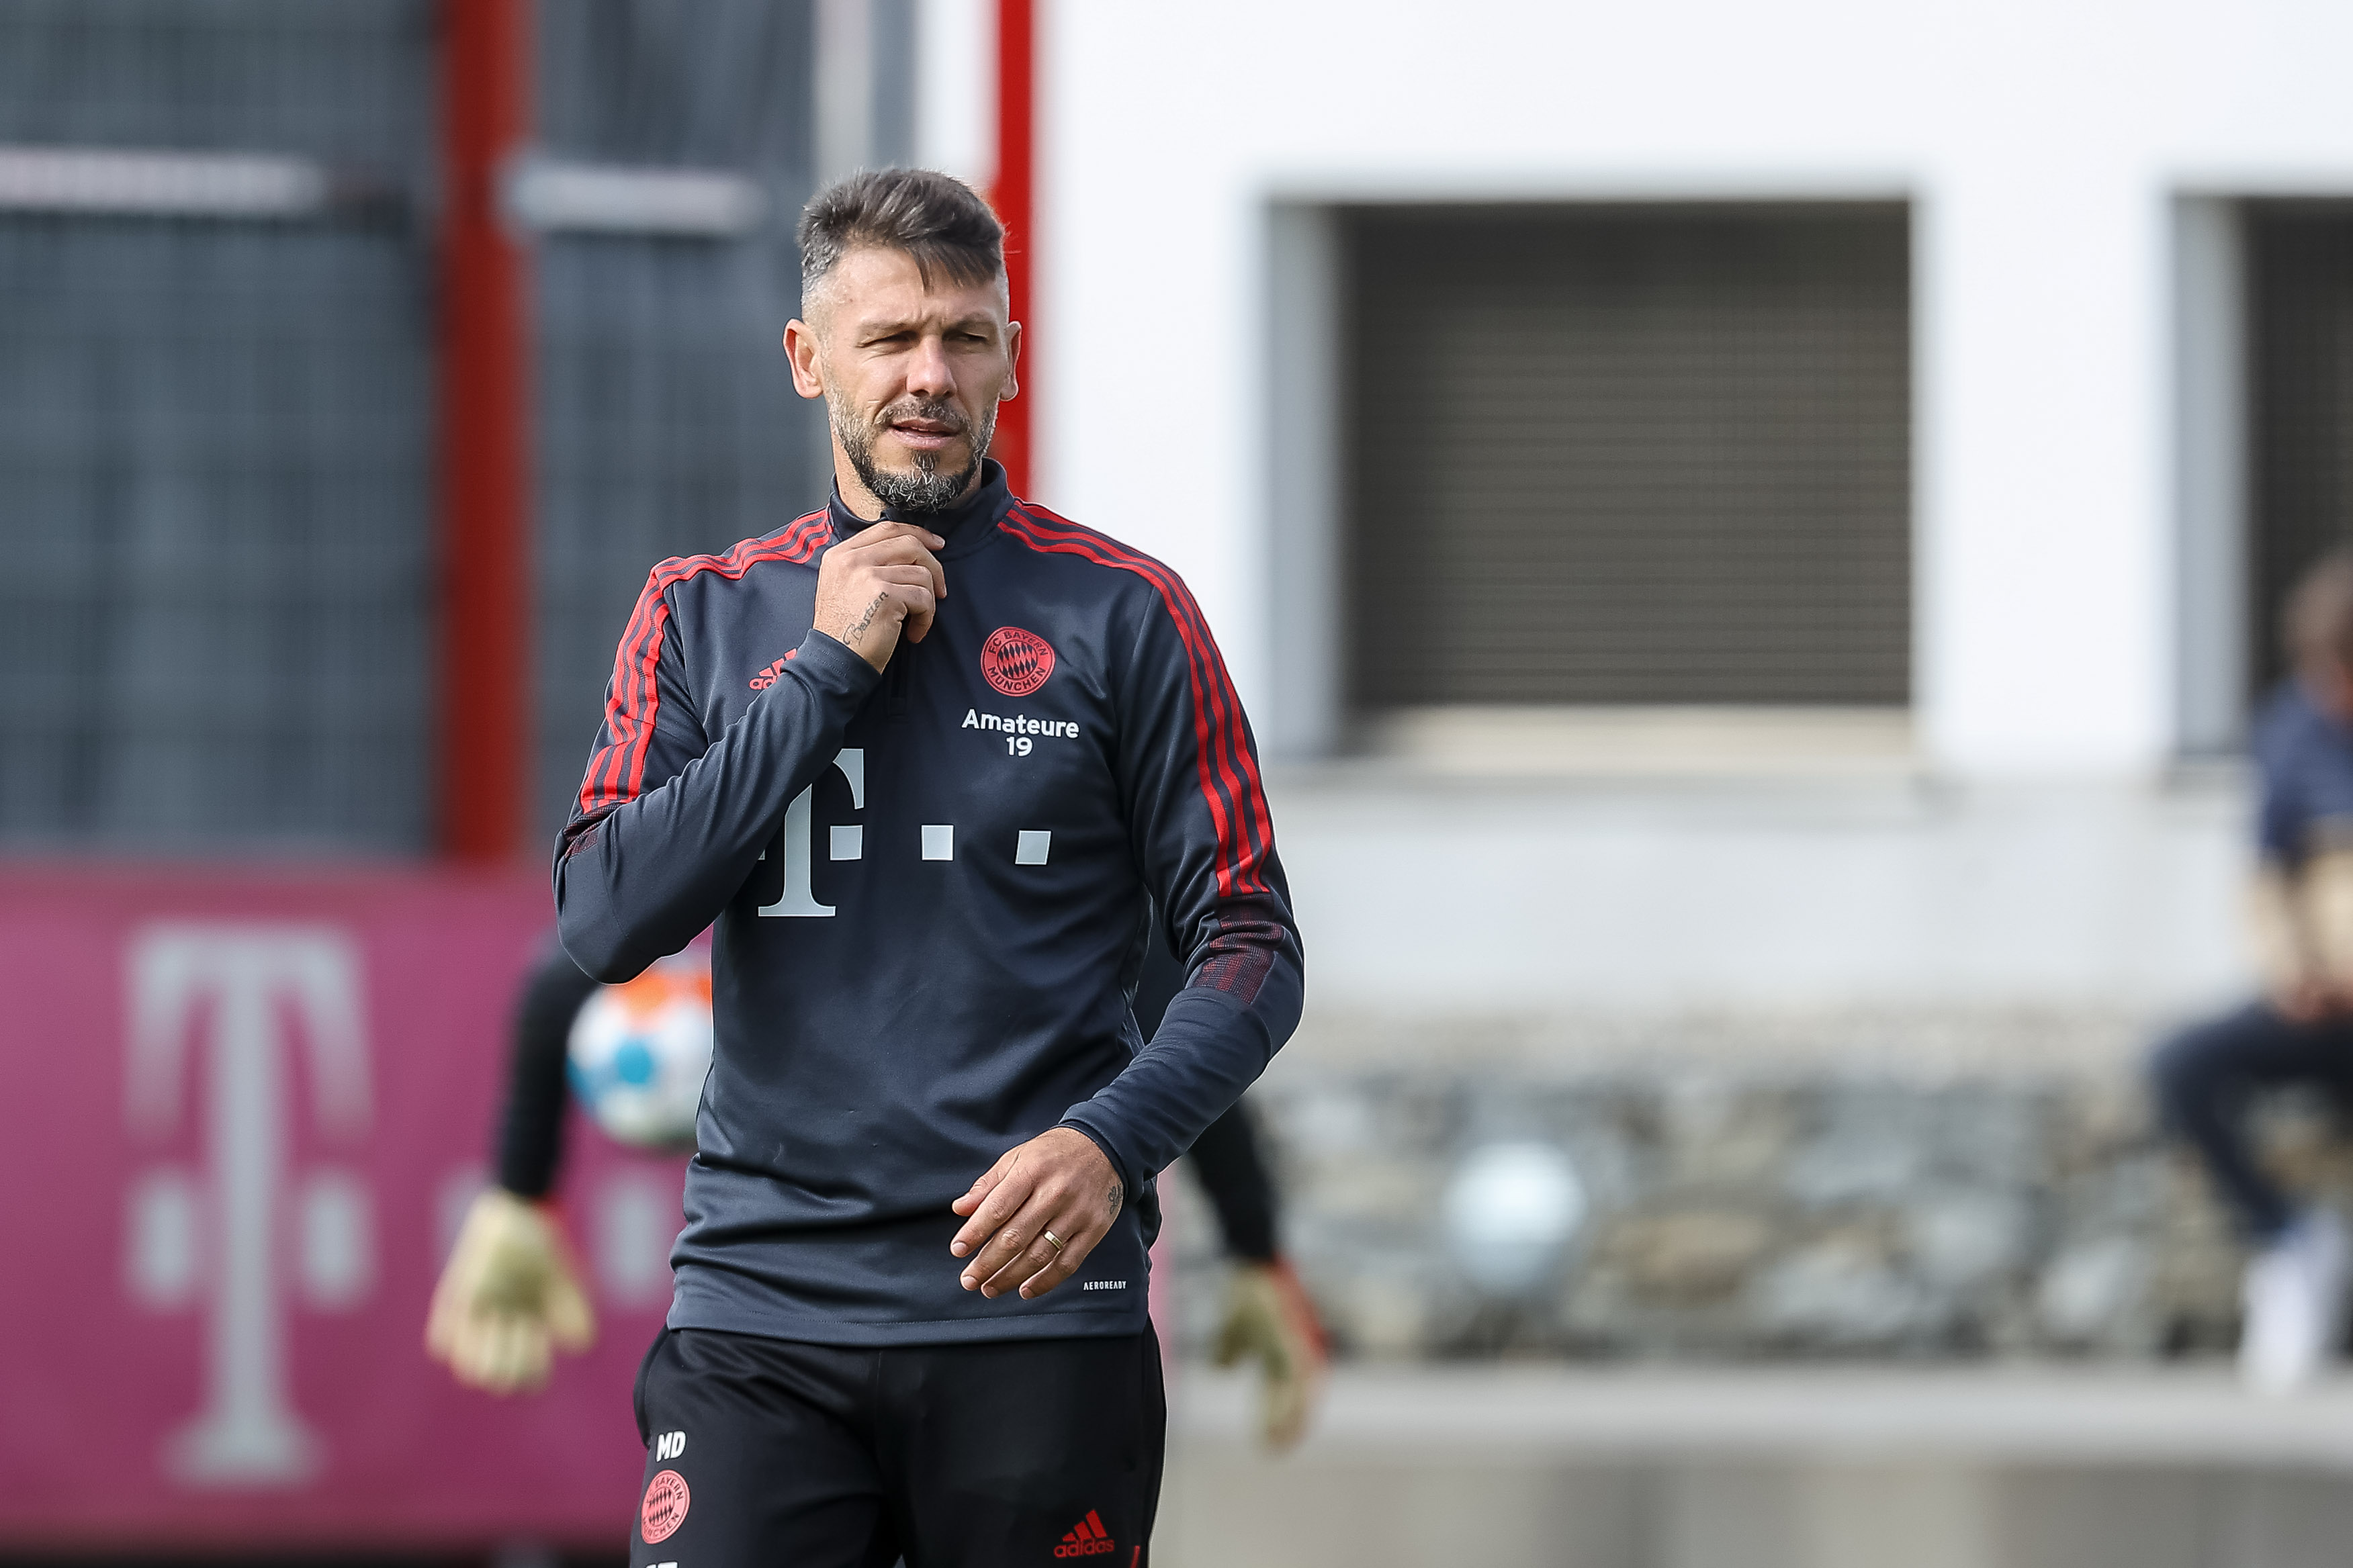 Bayern II head coach Martin Demichelis looks on during a training session in October 2021